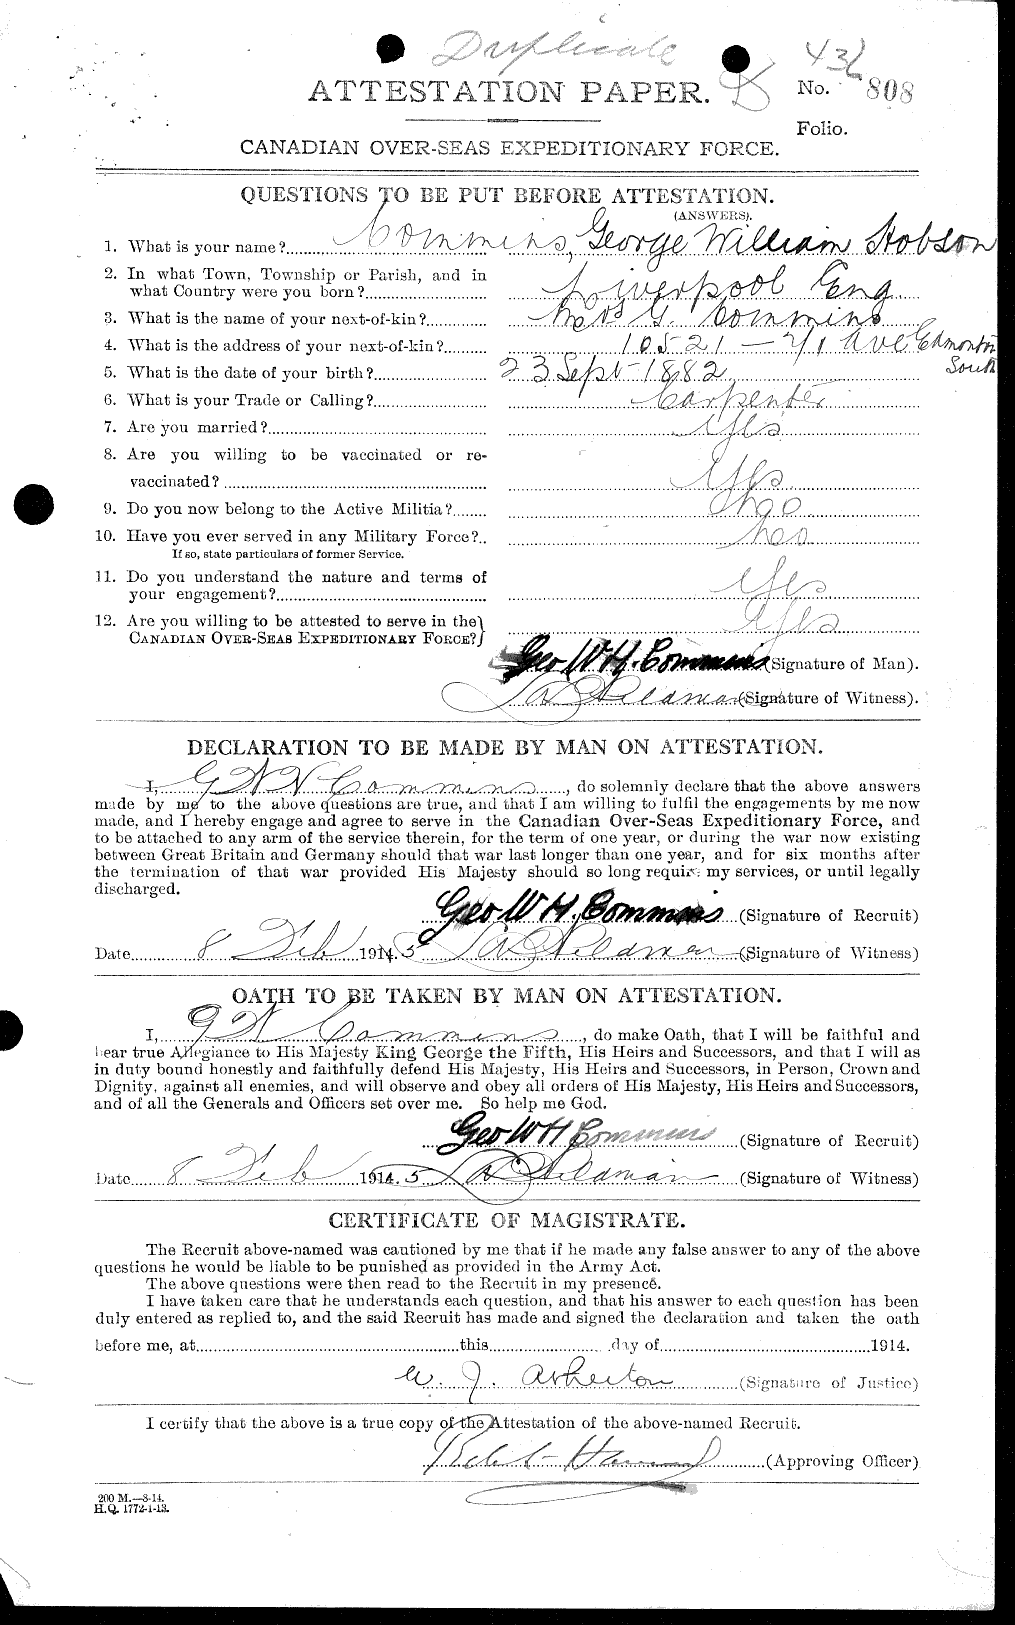 Personnel Records of the First World War - CEF 029642a